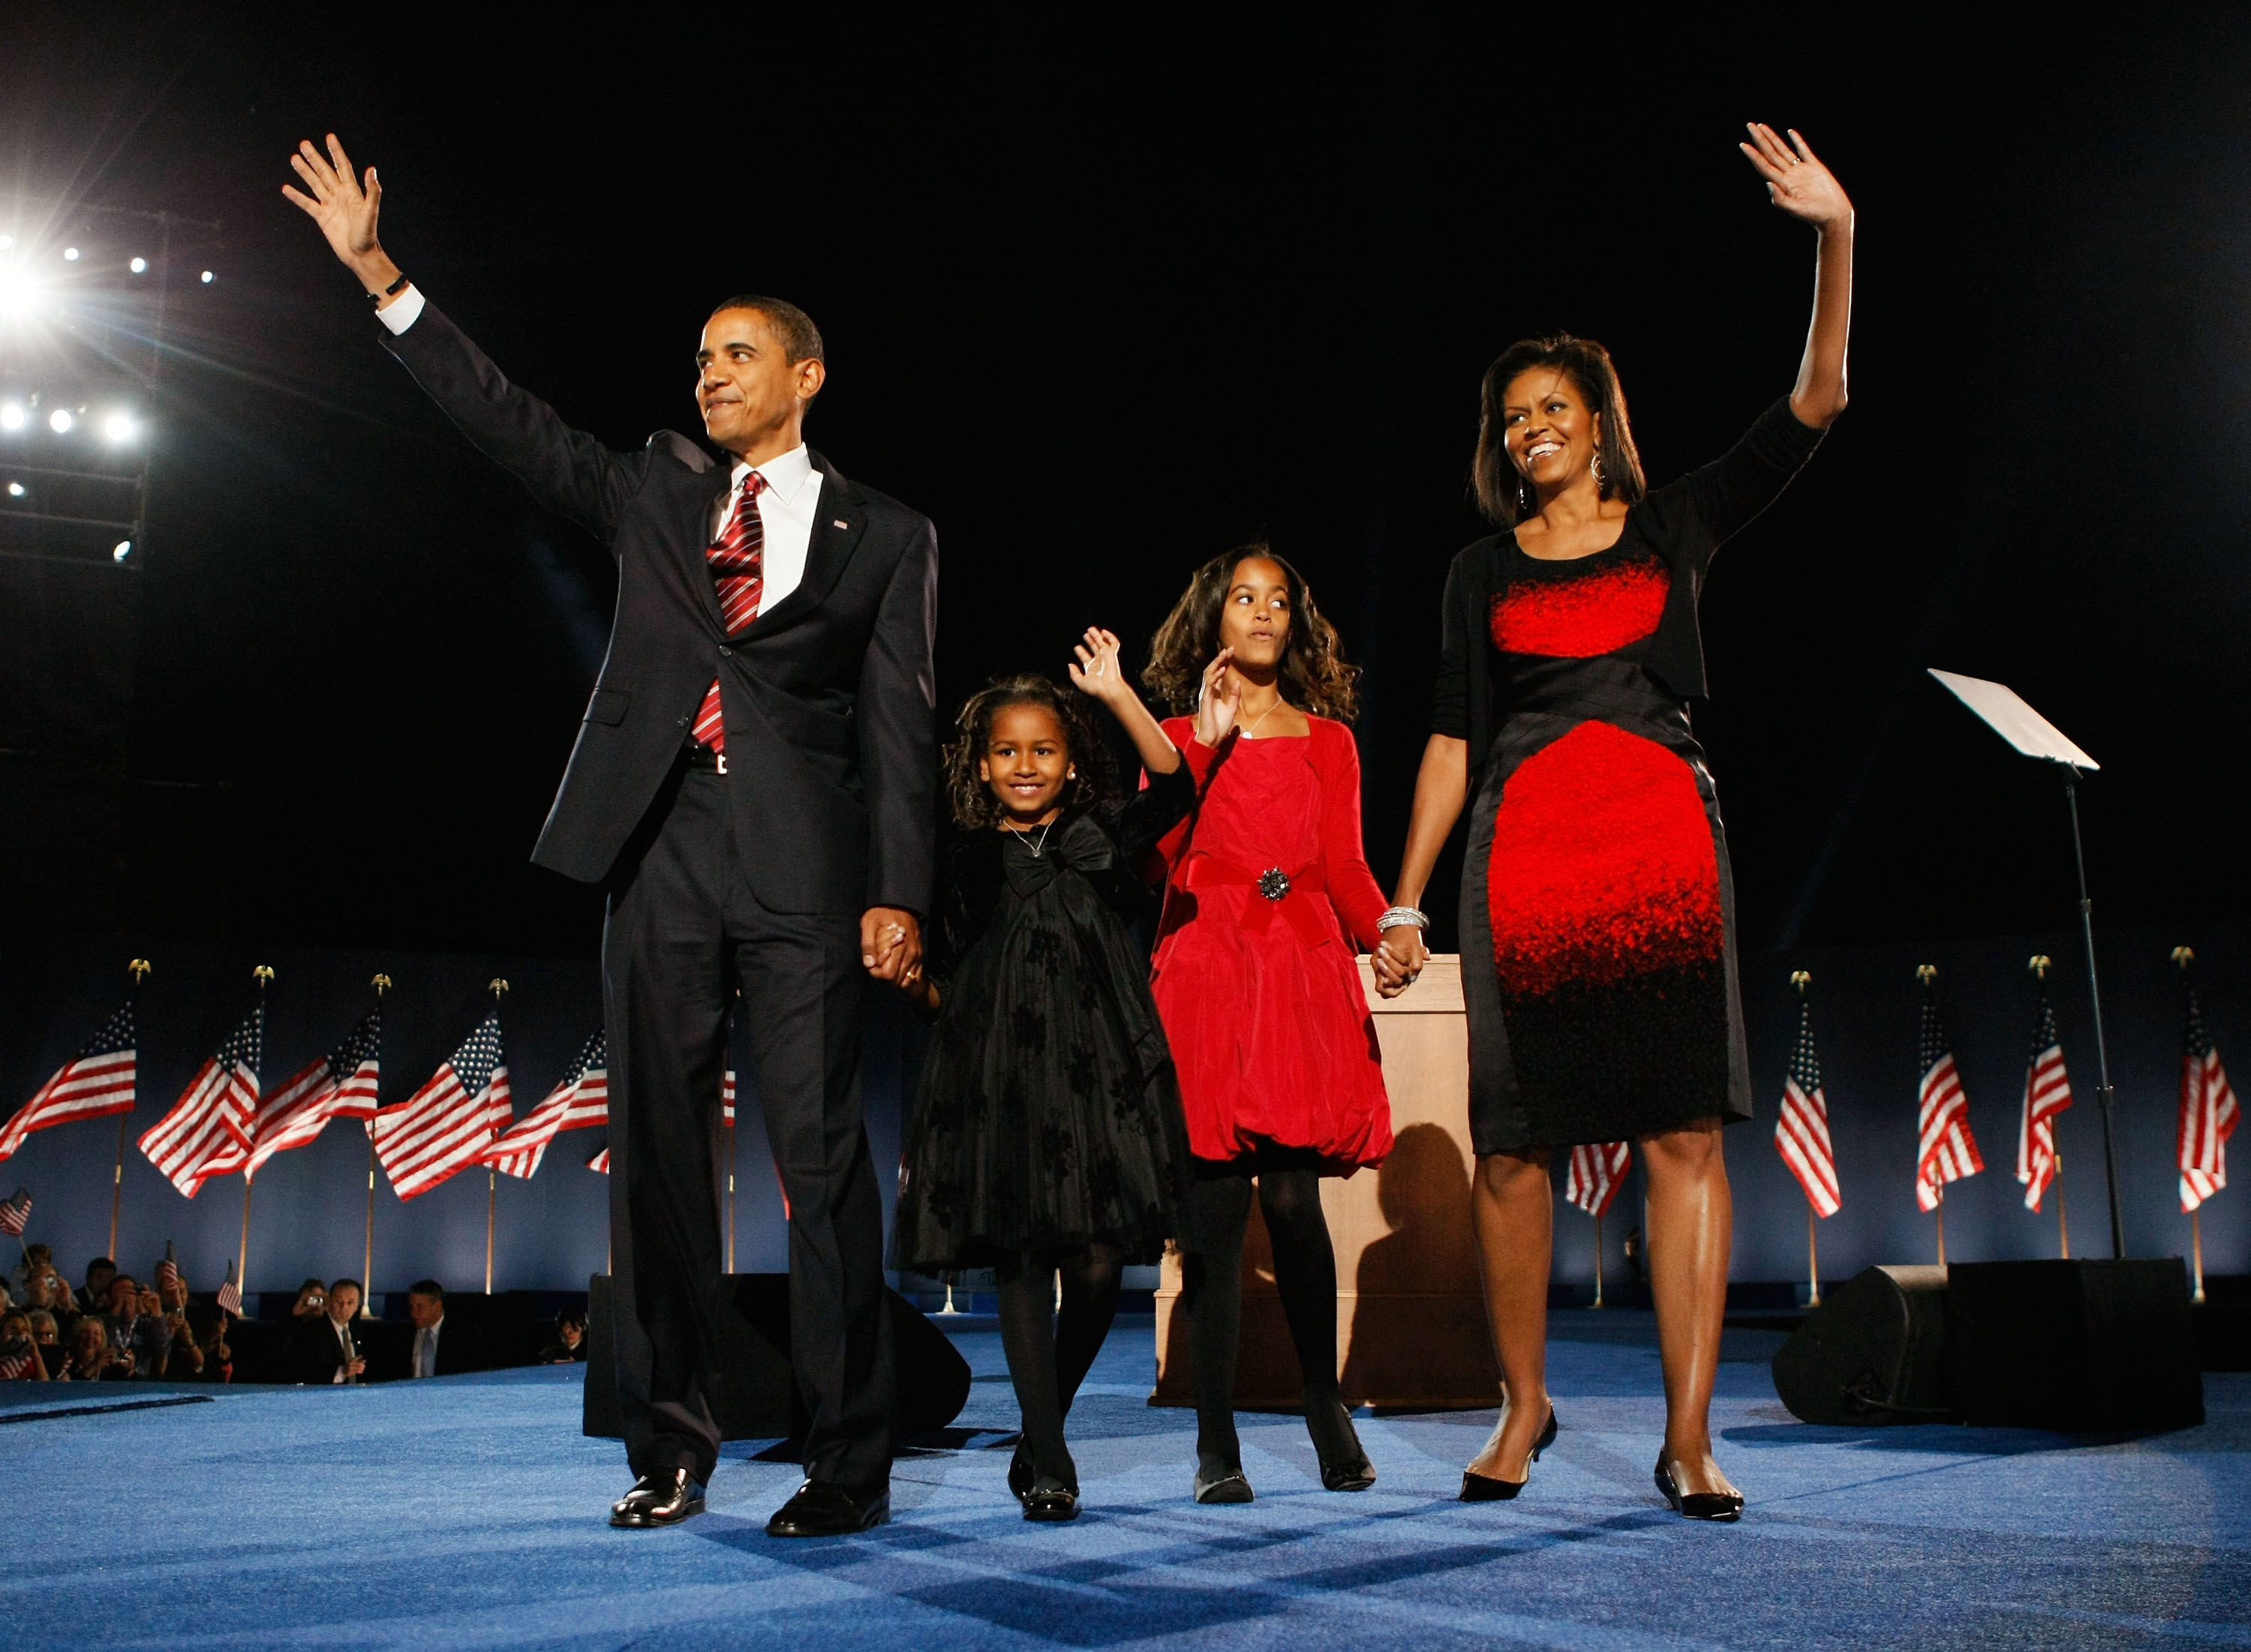 President Obama and family waving